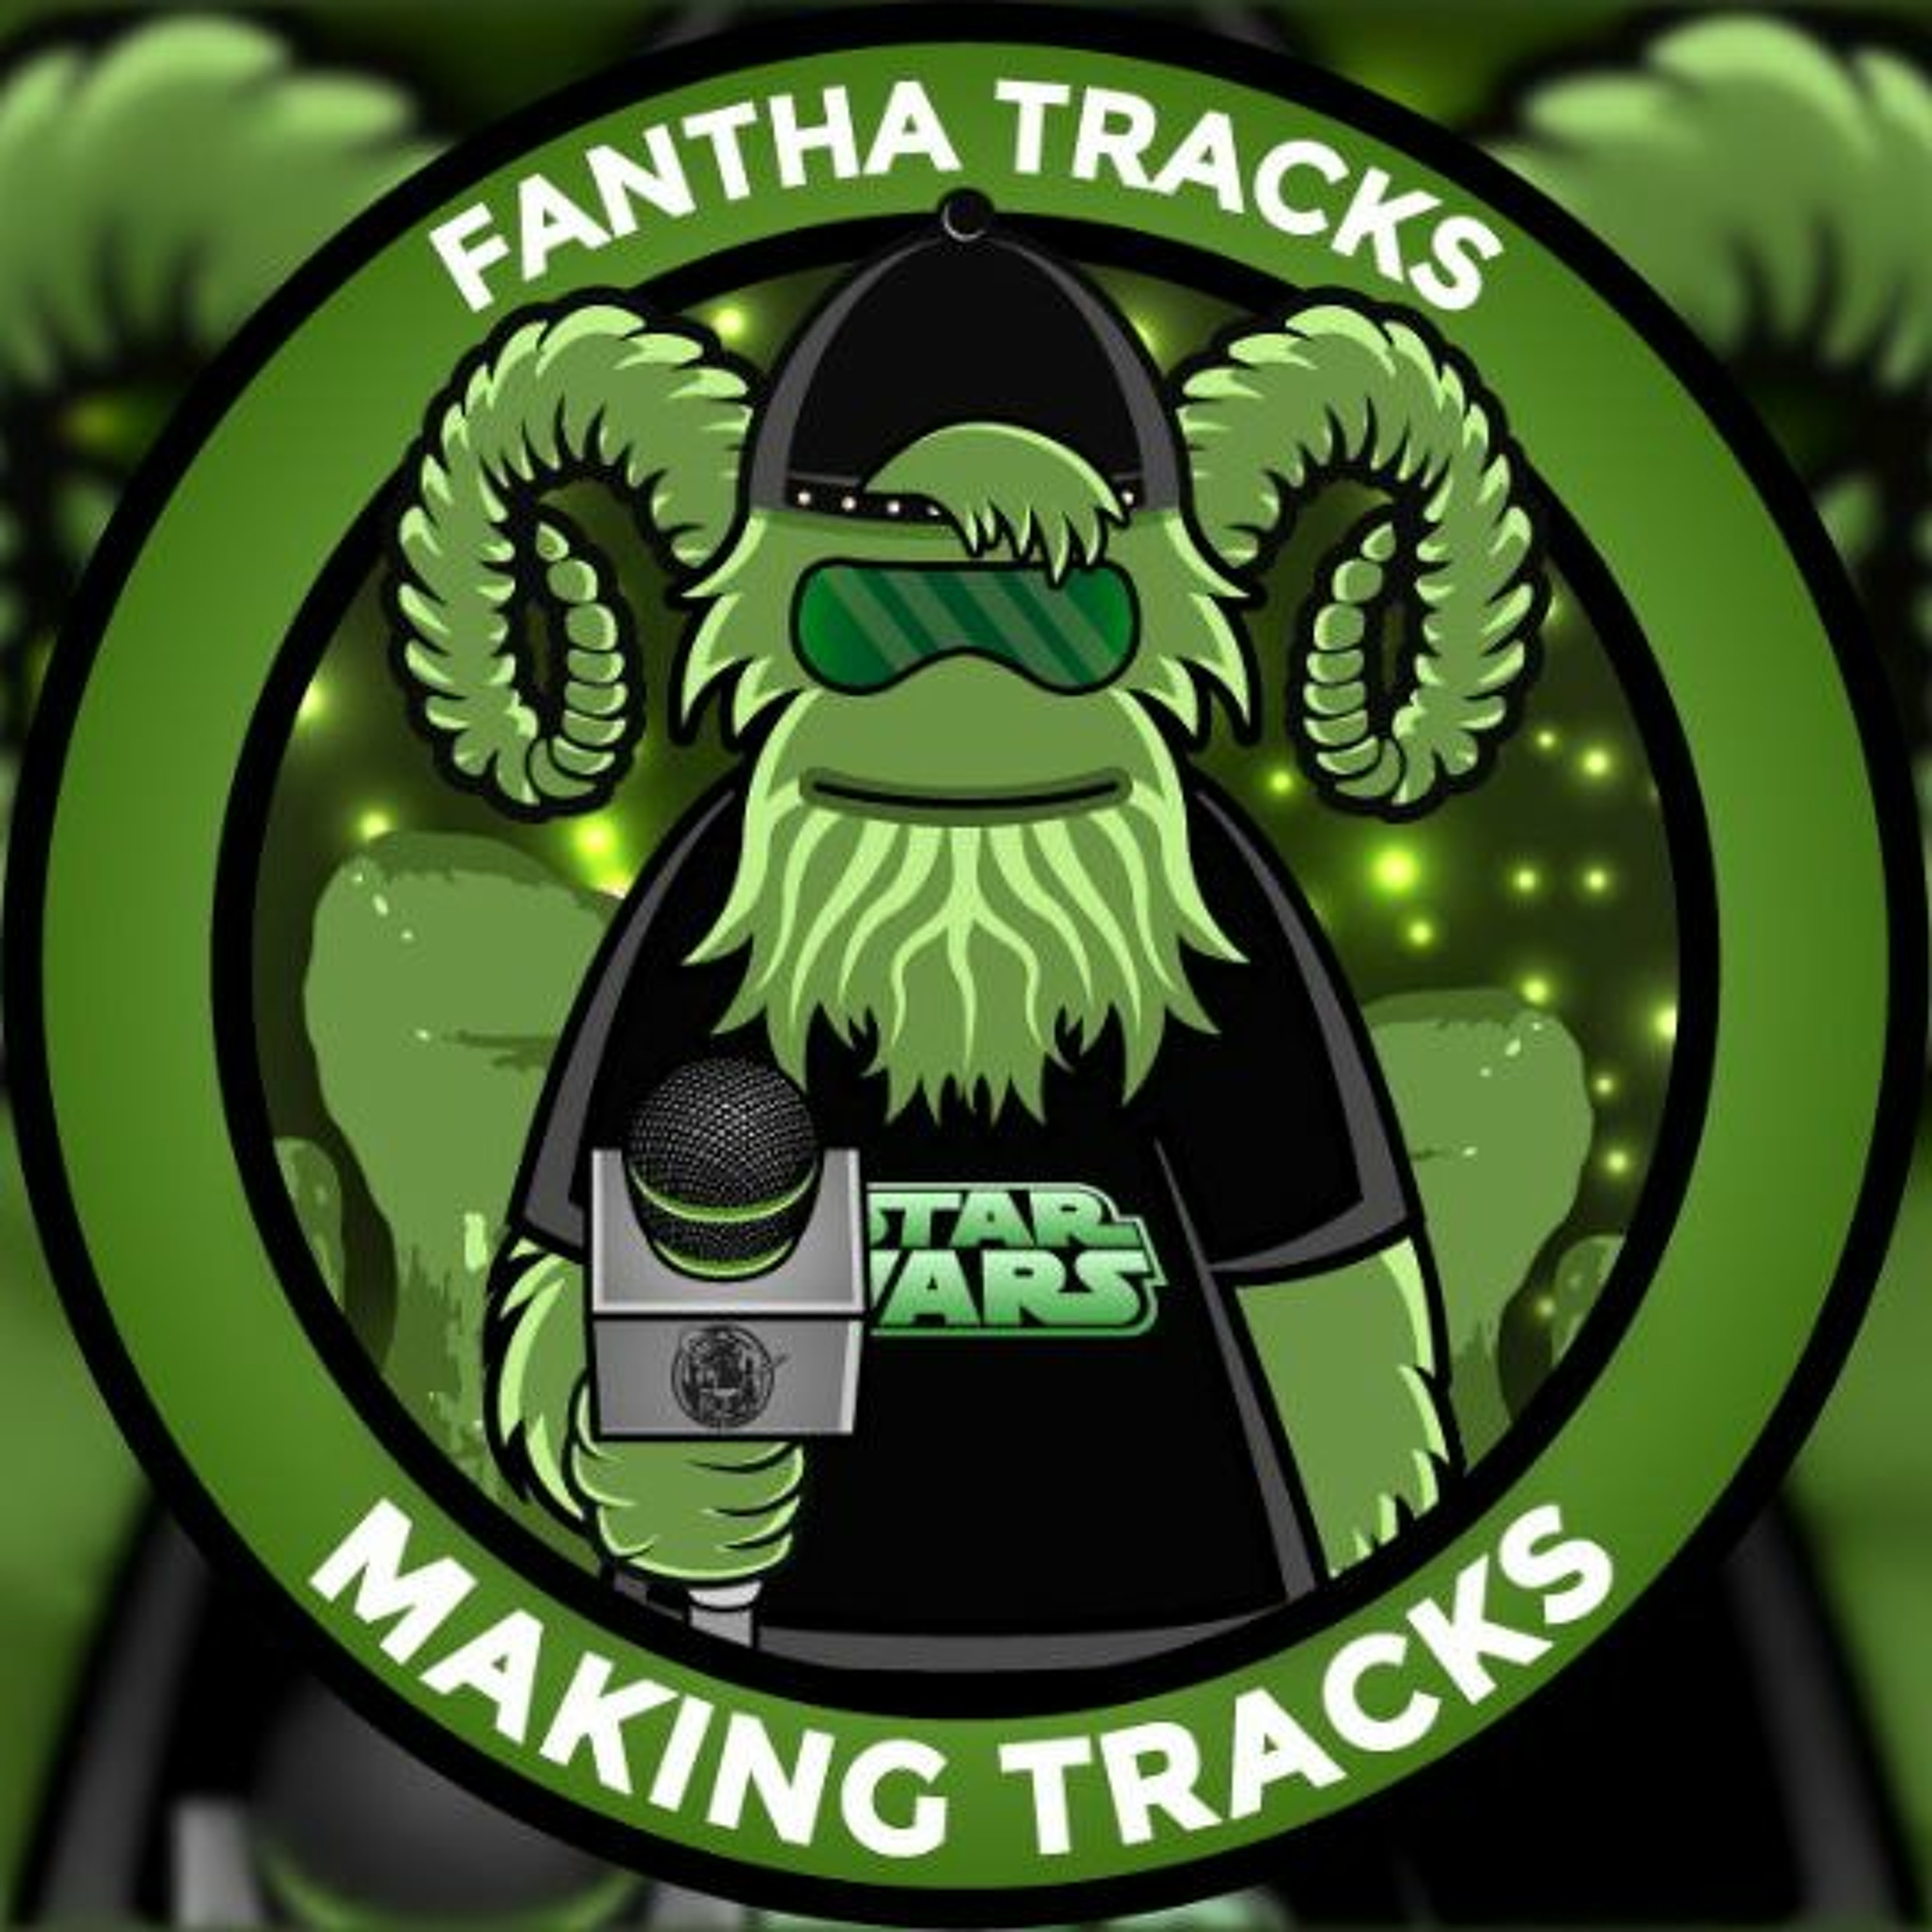 Making Tracks Episode 167: The relic he’s been chasing: With guest Samantha Alleyne